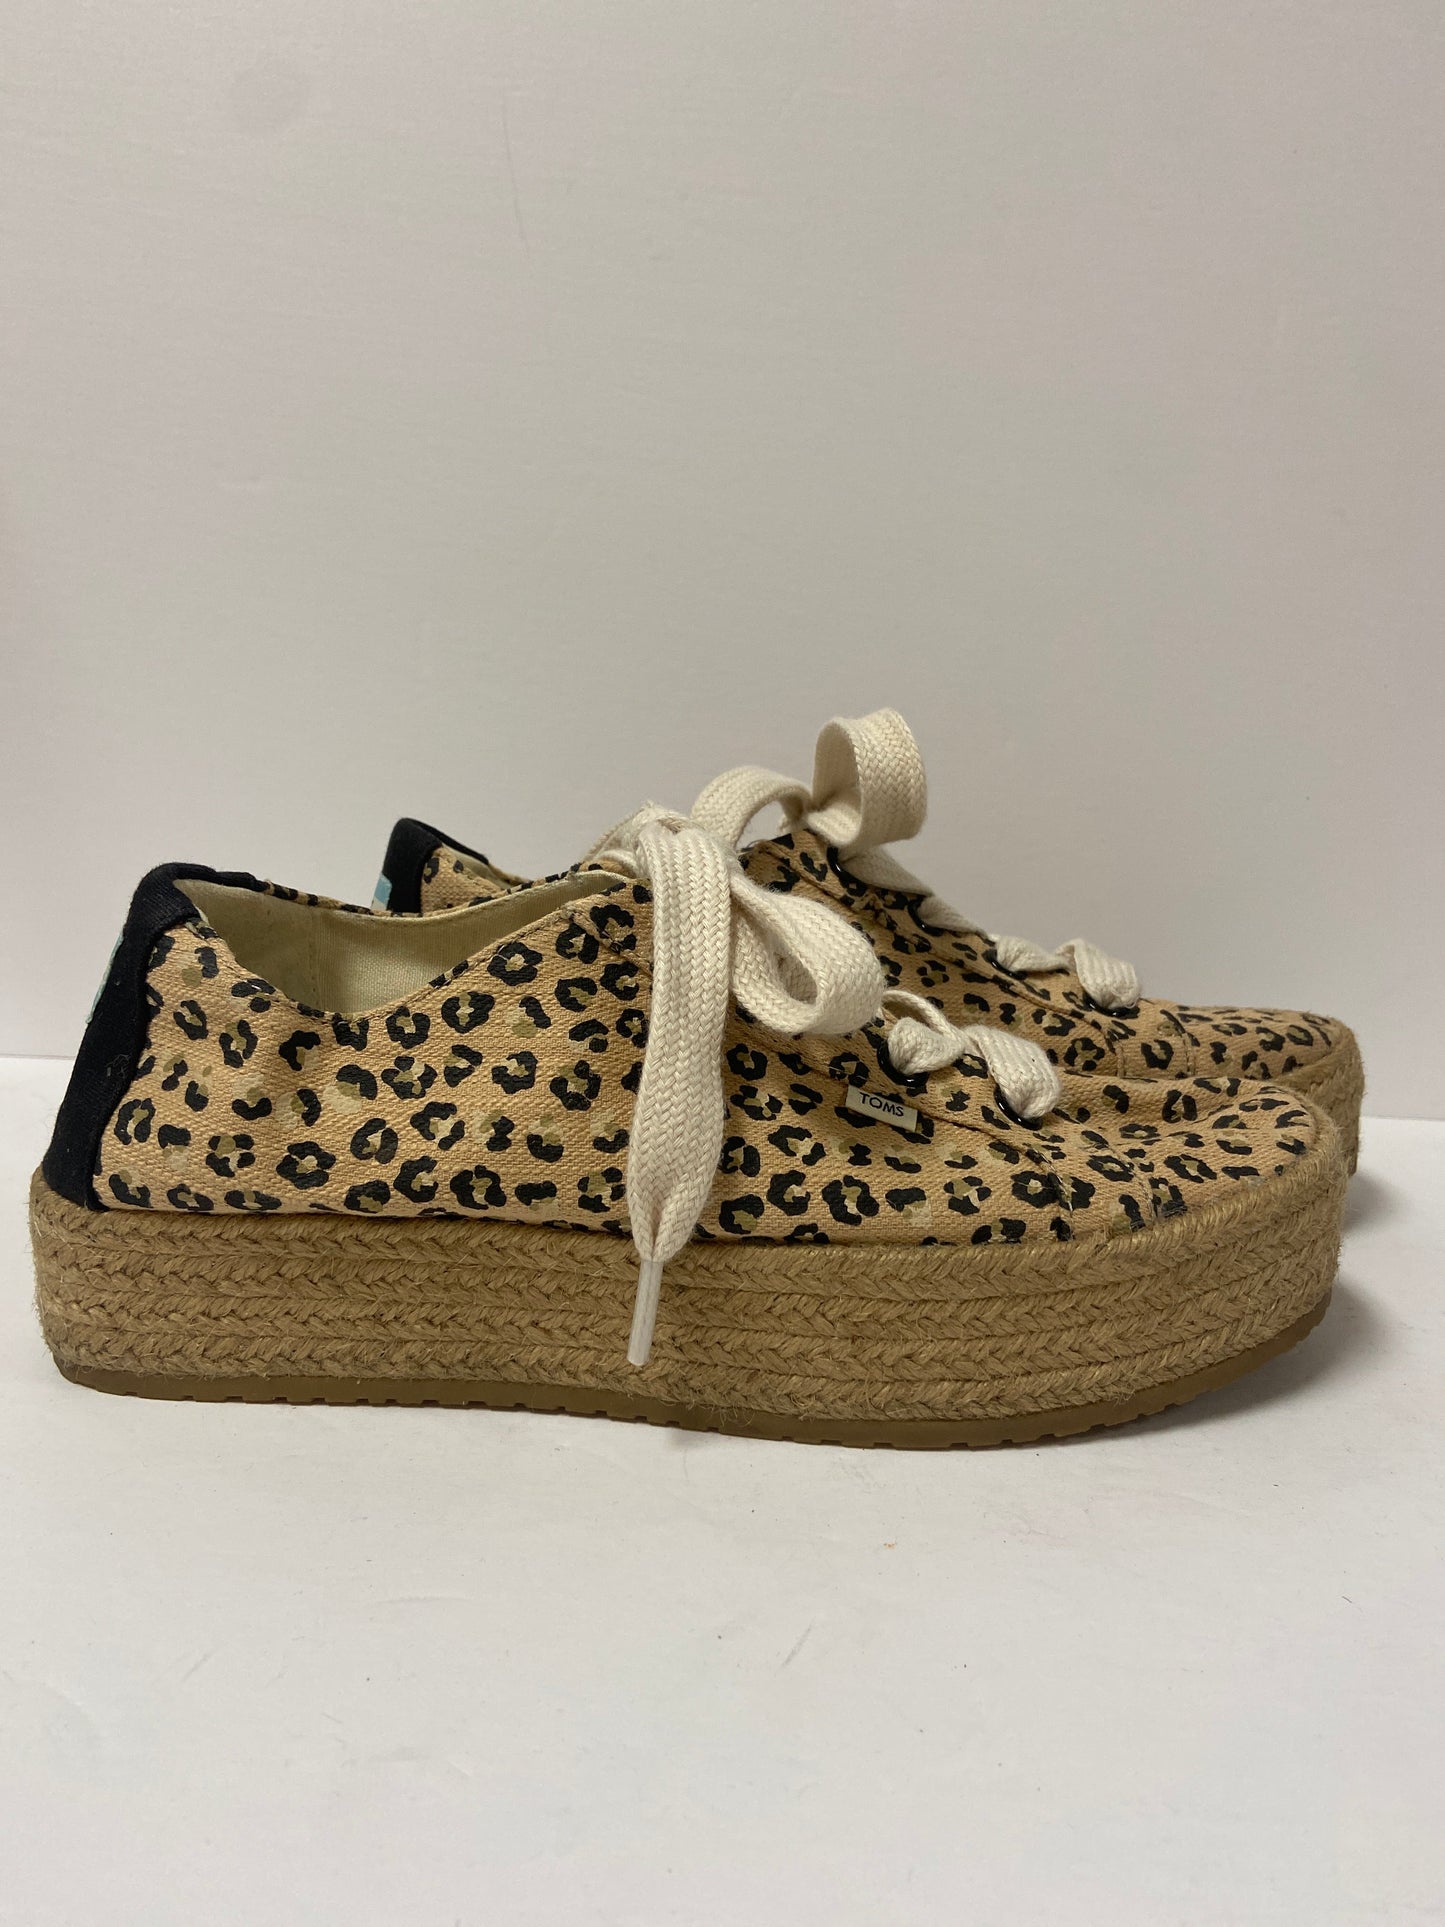 Shoes Flats Espadrille By Toms  Size: 9.5